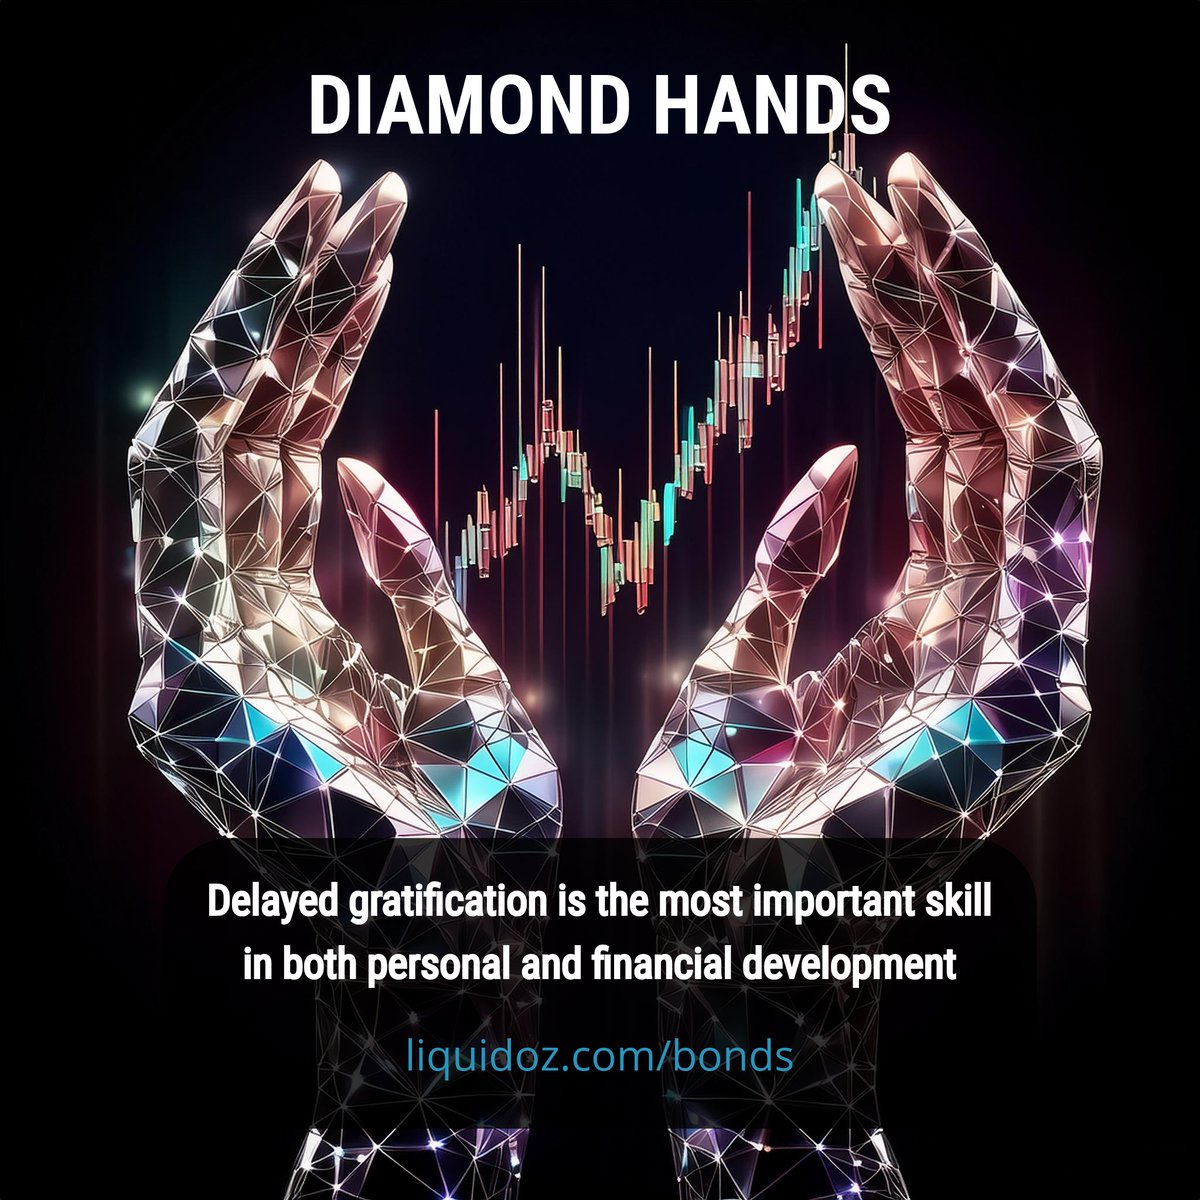 Delayed gratification is the most important skill in both personal and financial development.

Create a 90-day bond with Liquid and lock in a 12% annualized yield liquidoz.com/bonds

#highyieldsavings #savingsaccount #bonds #savingsbond #bestsavingsaccount #diamondhands